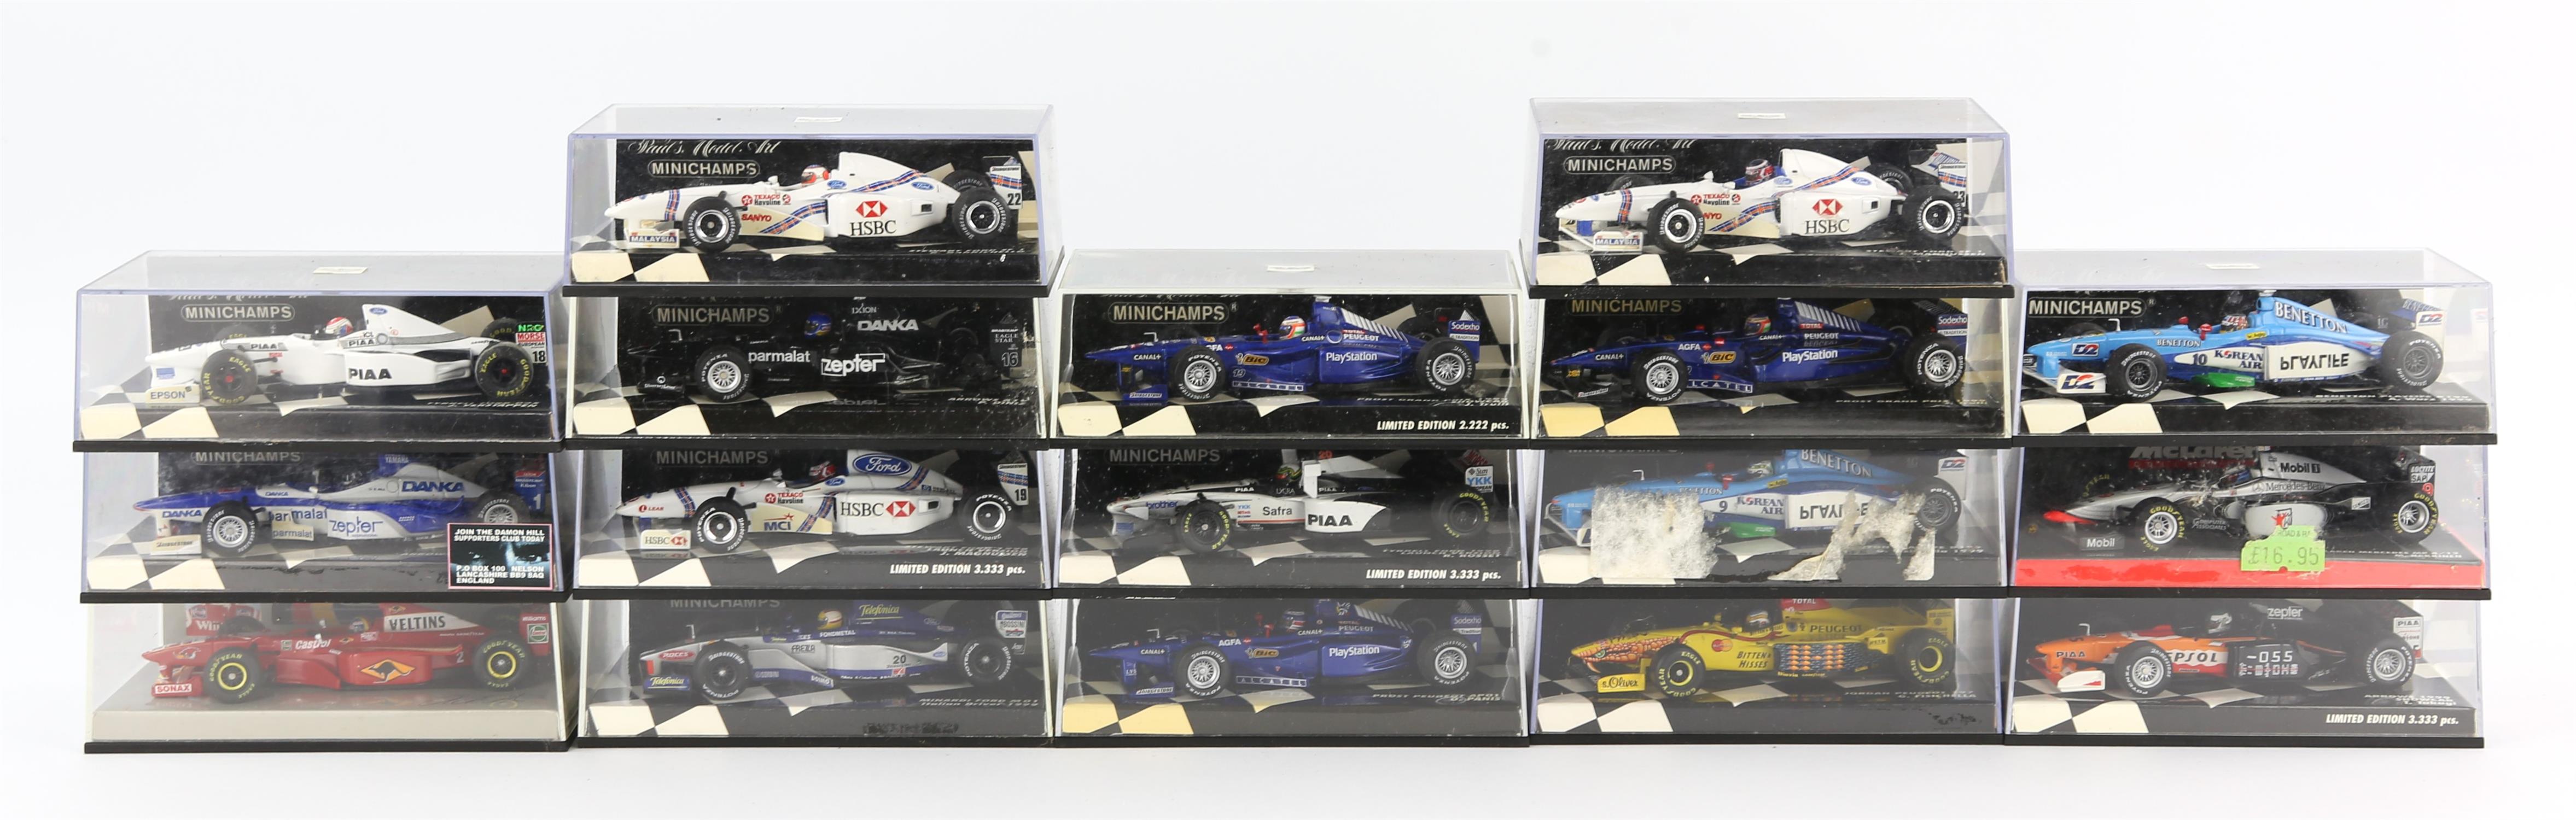 Collection of 17 Minichamps Formula 1 diecast models, All in Perspex cases, 1:43 scale, (1 box).